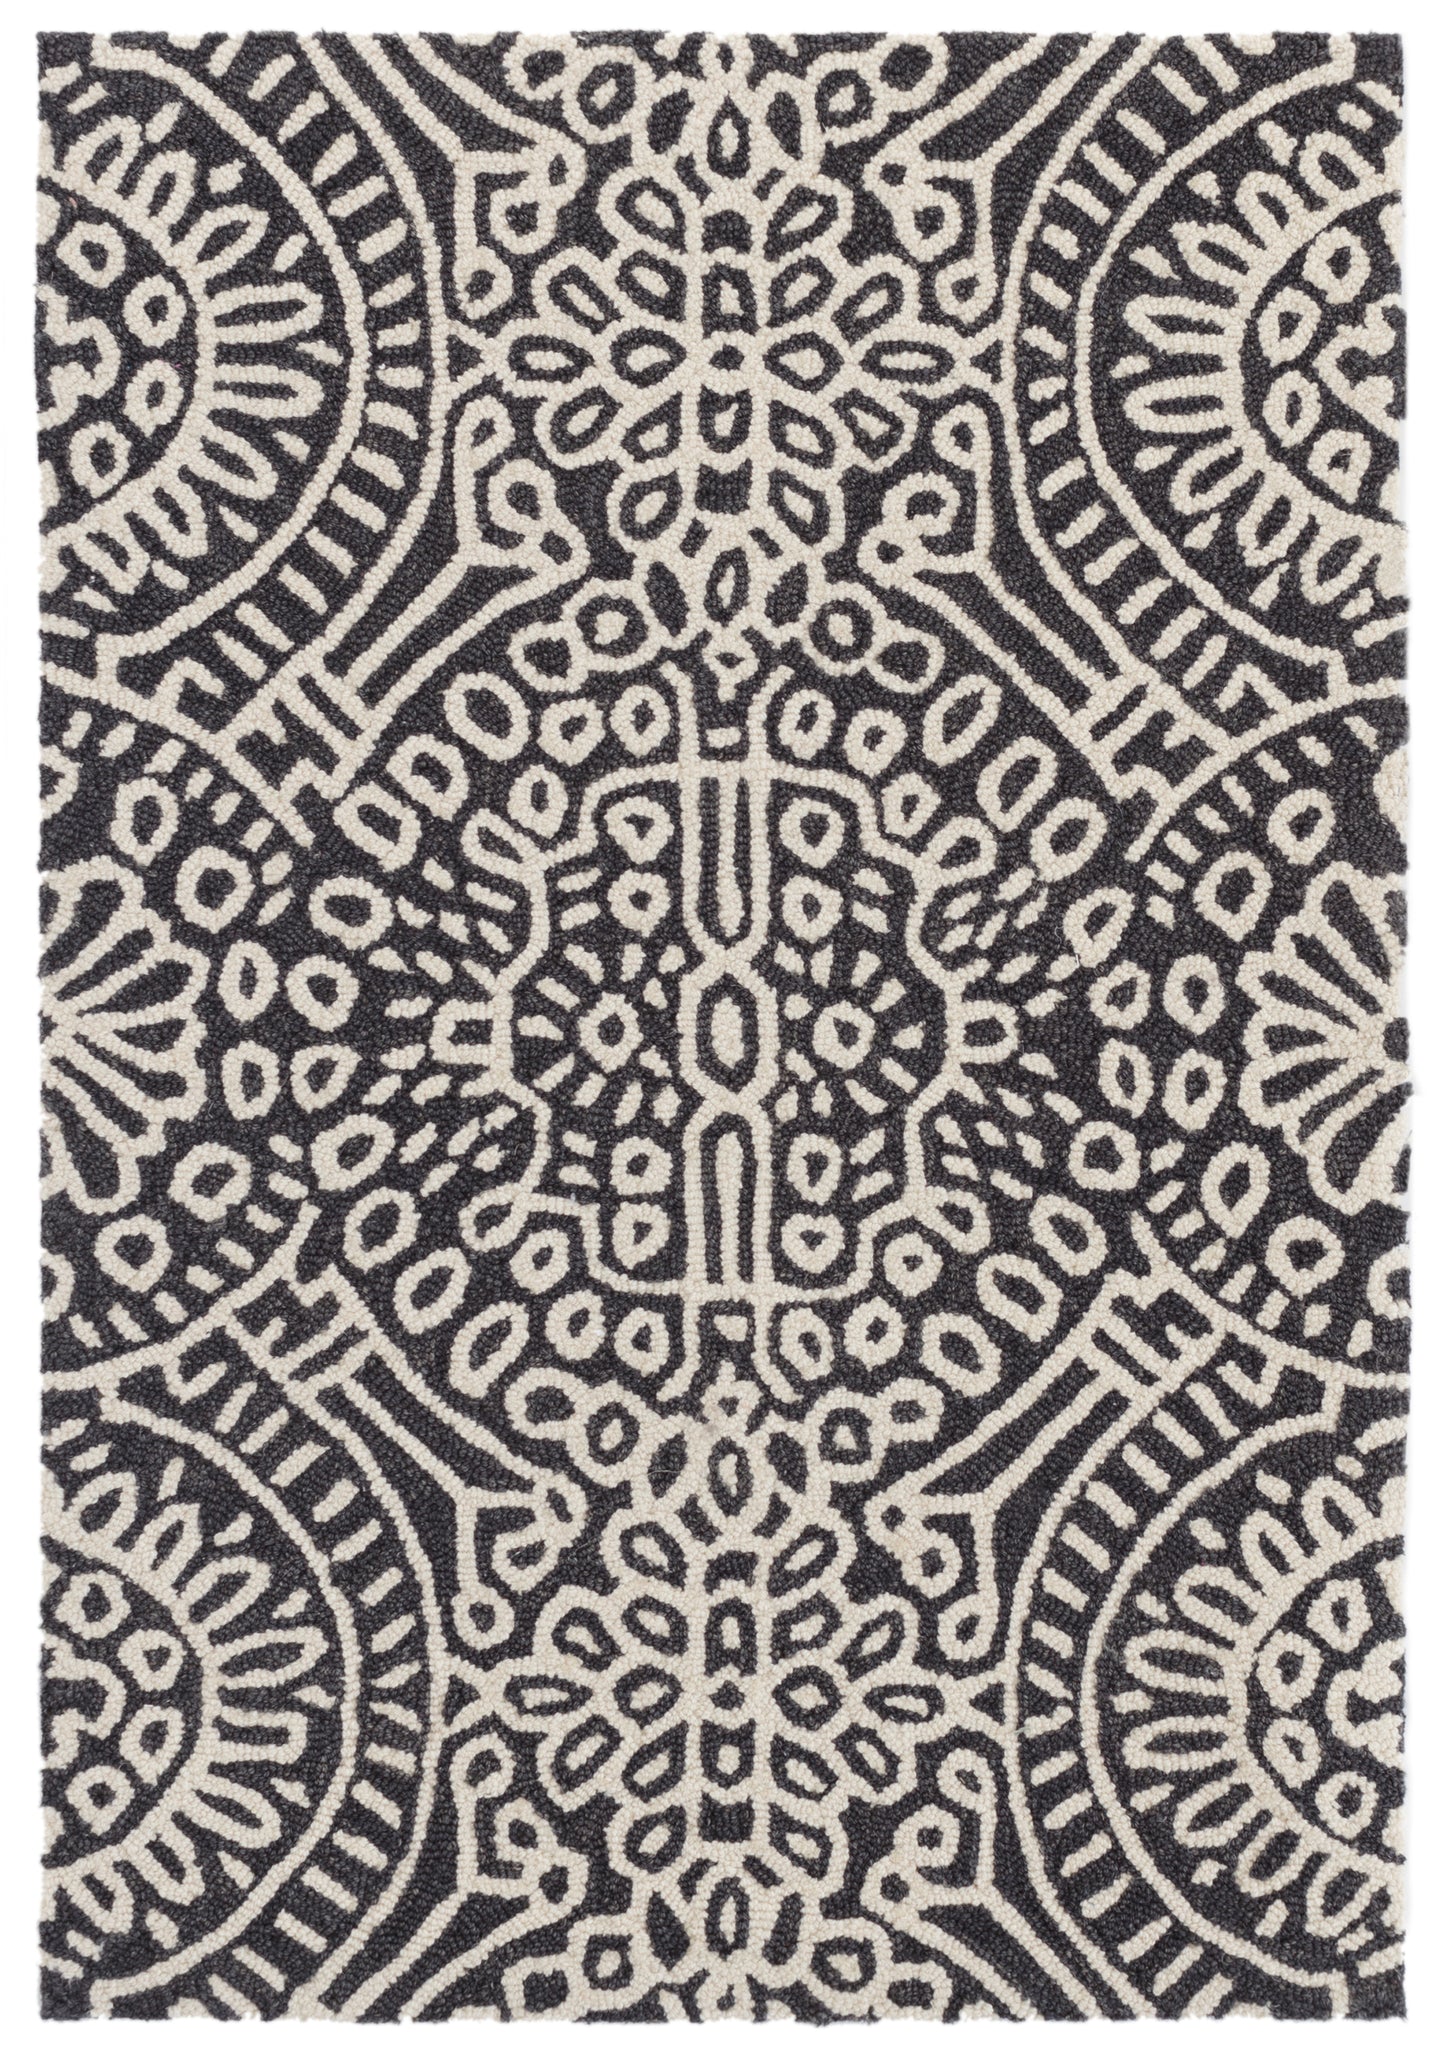 Rug - Micro Hooked Wool - Temple Charcoal